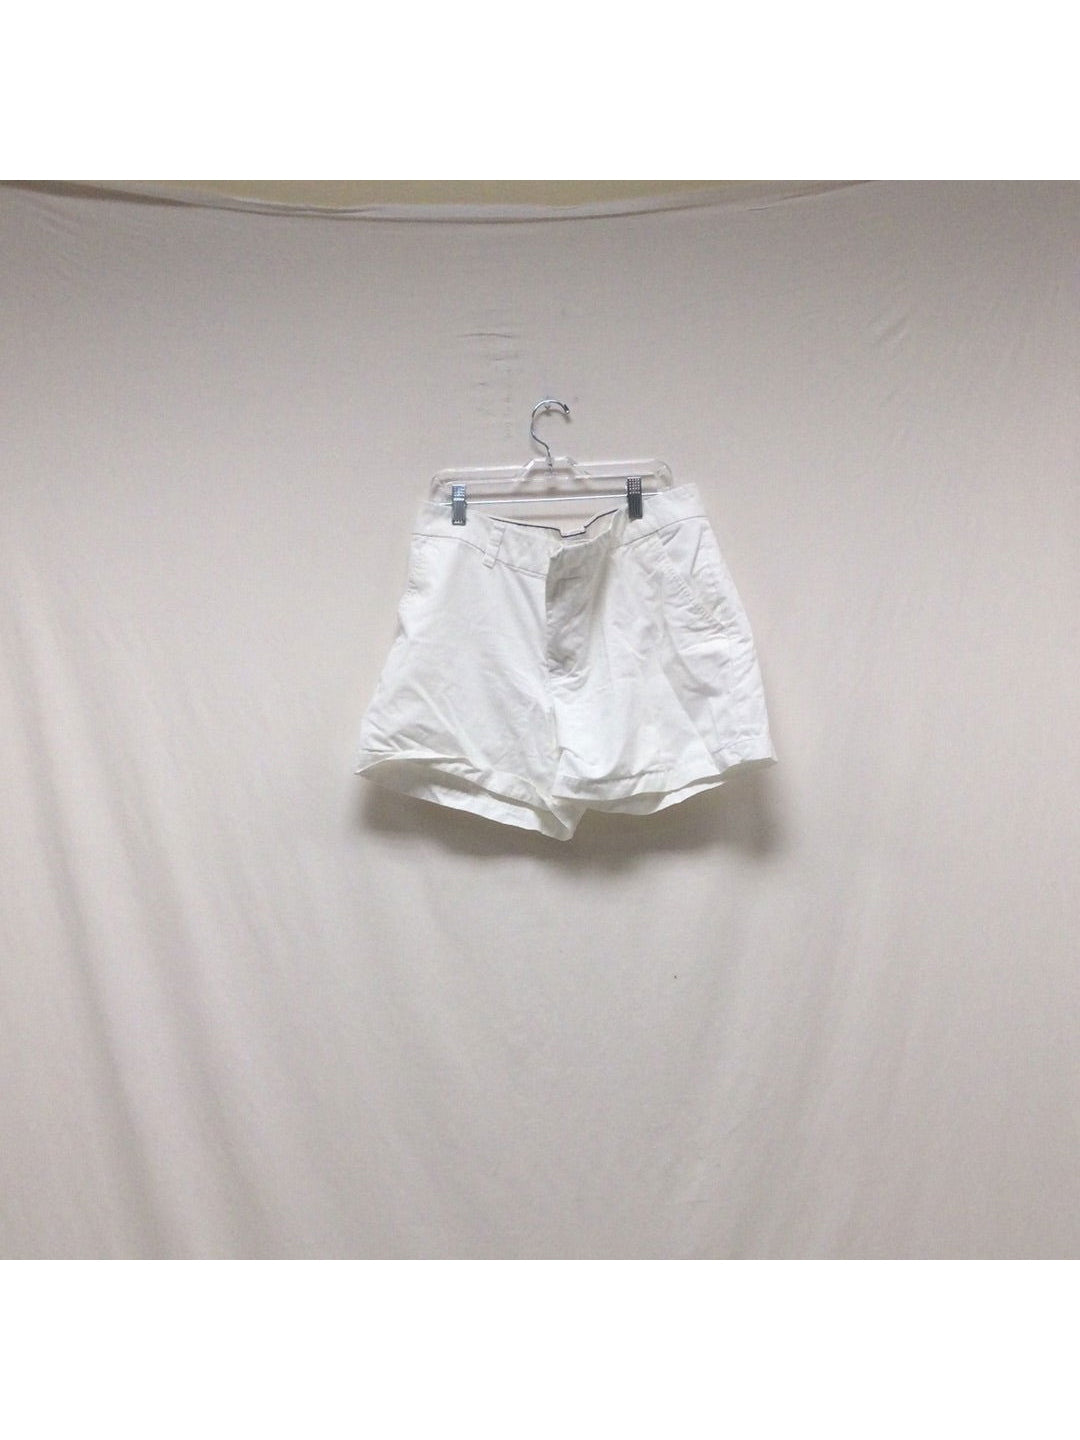 Tommy Hilfiger White Khaki Shorts - The Kennedy Collective Thrift - 